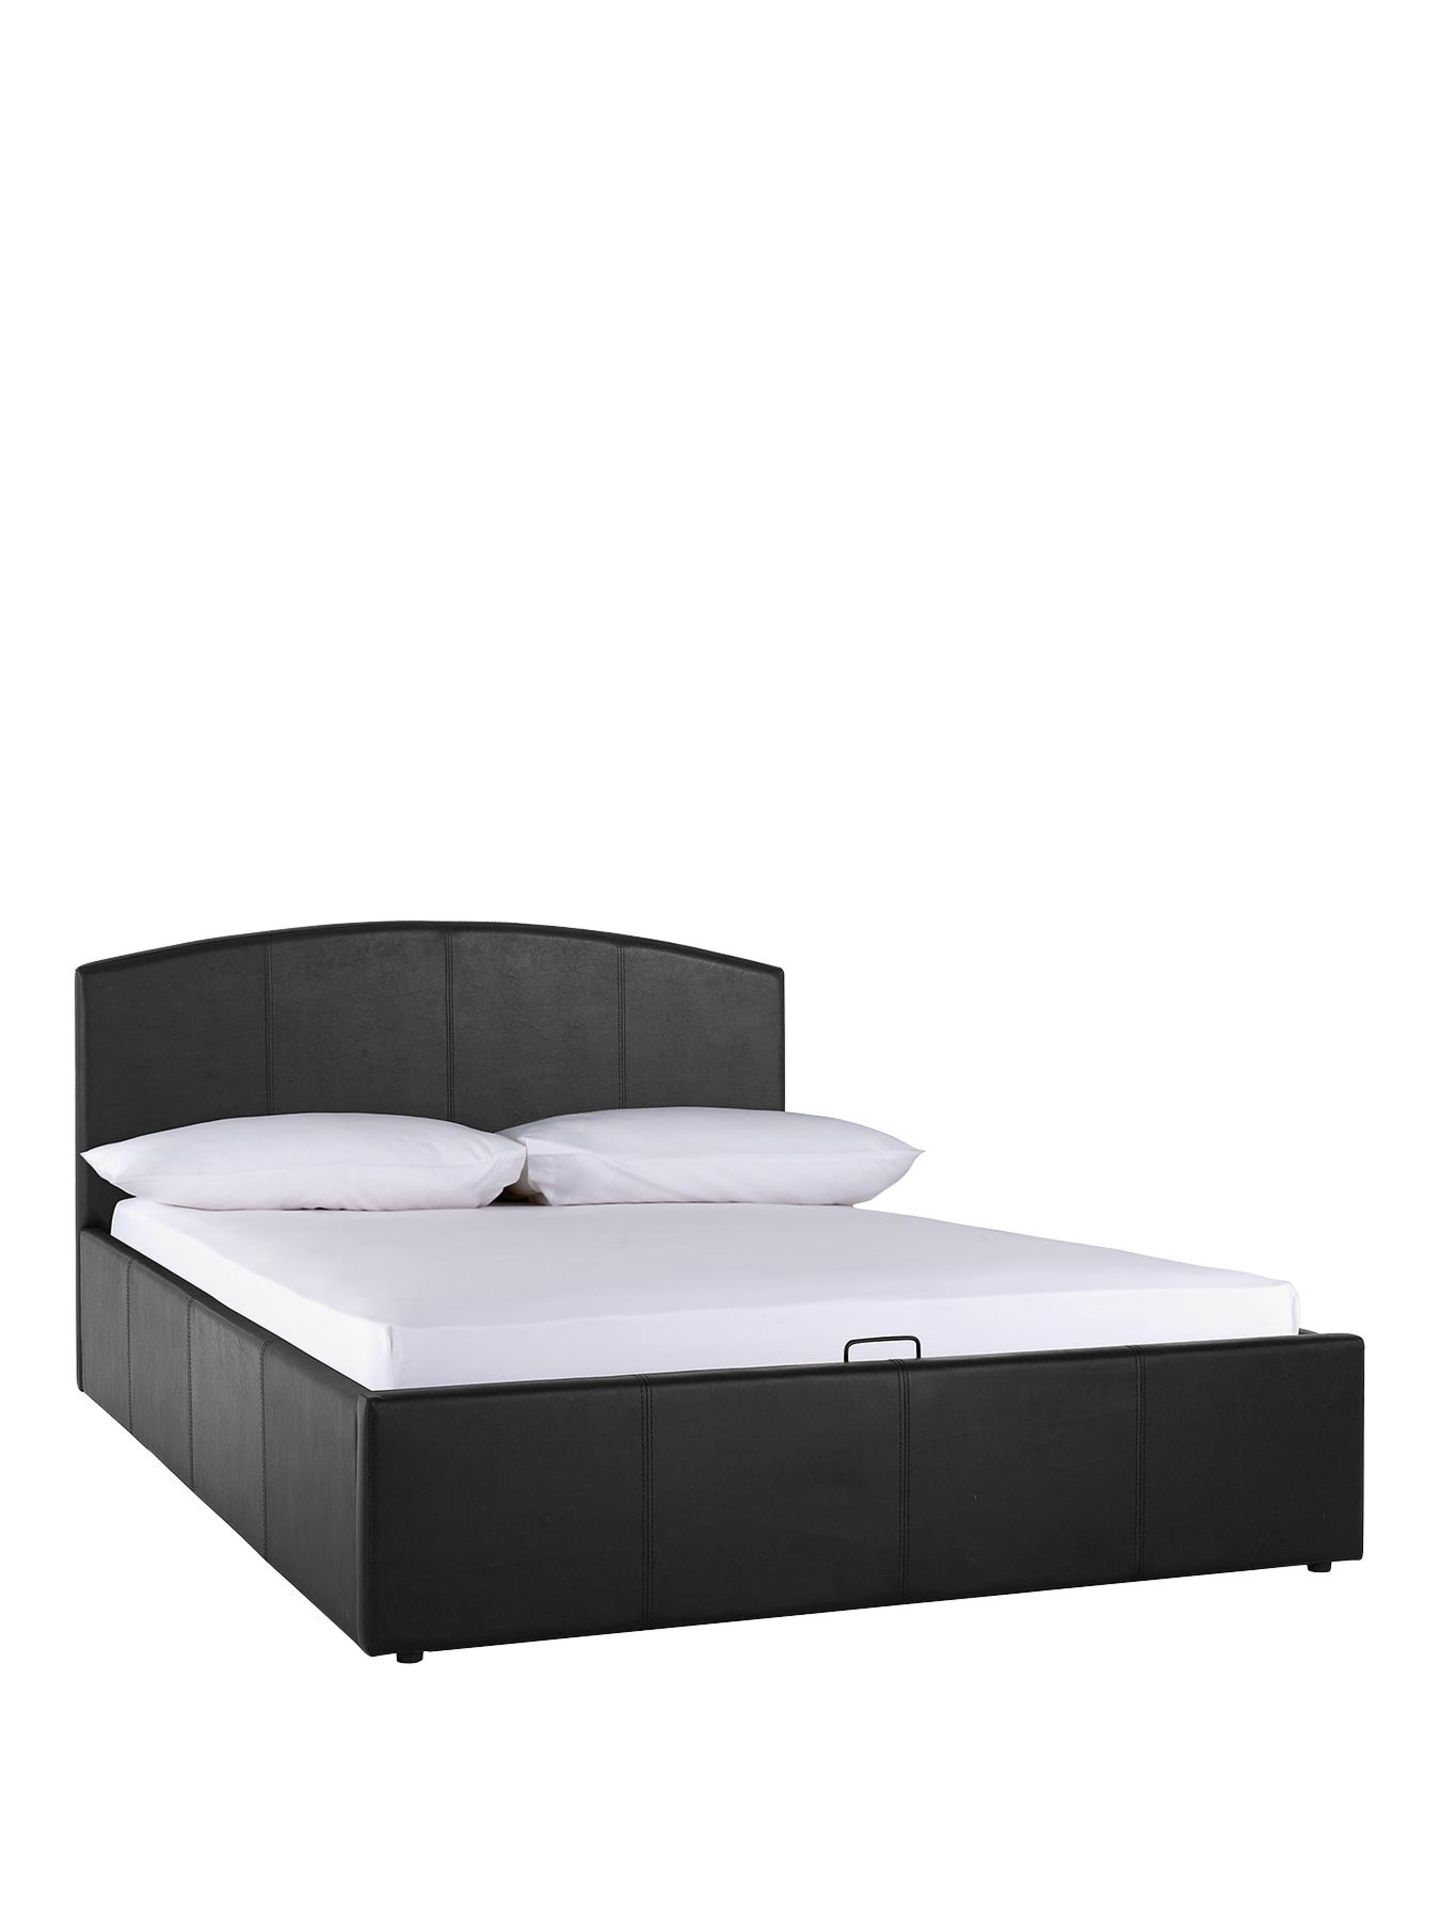 boxed item marston small double lift-up bed [black] 88x128x202cm rrp: £454.0